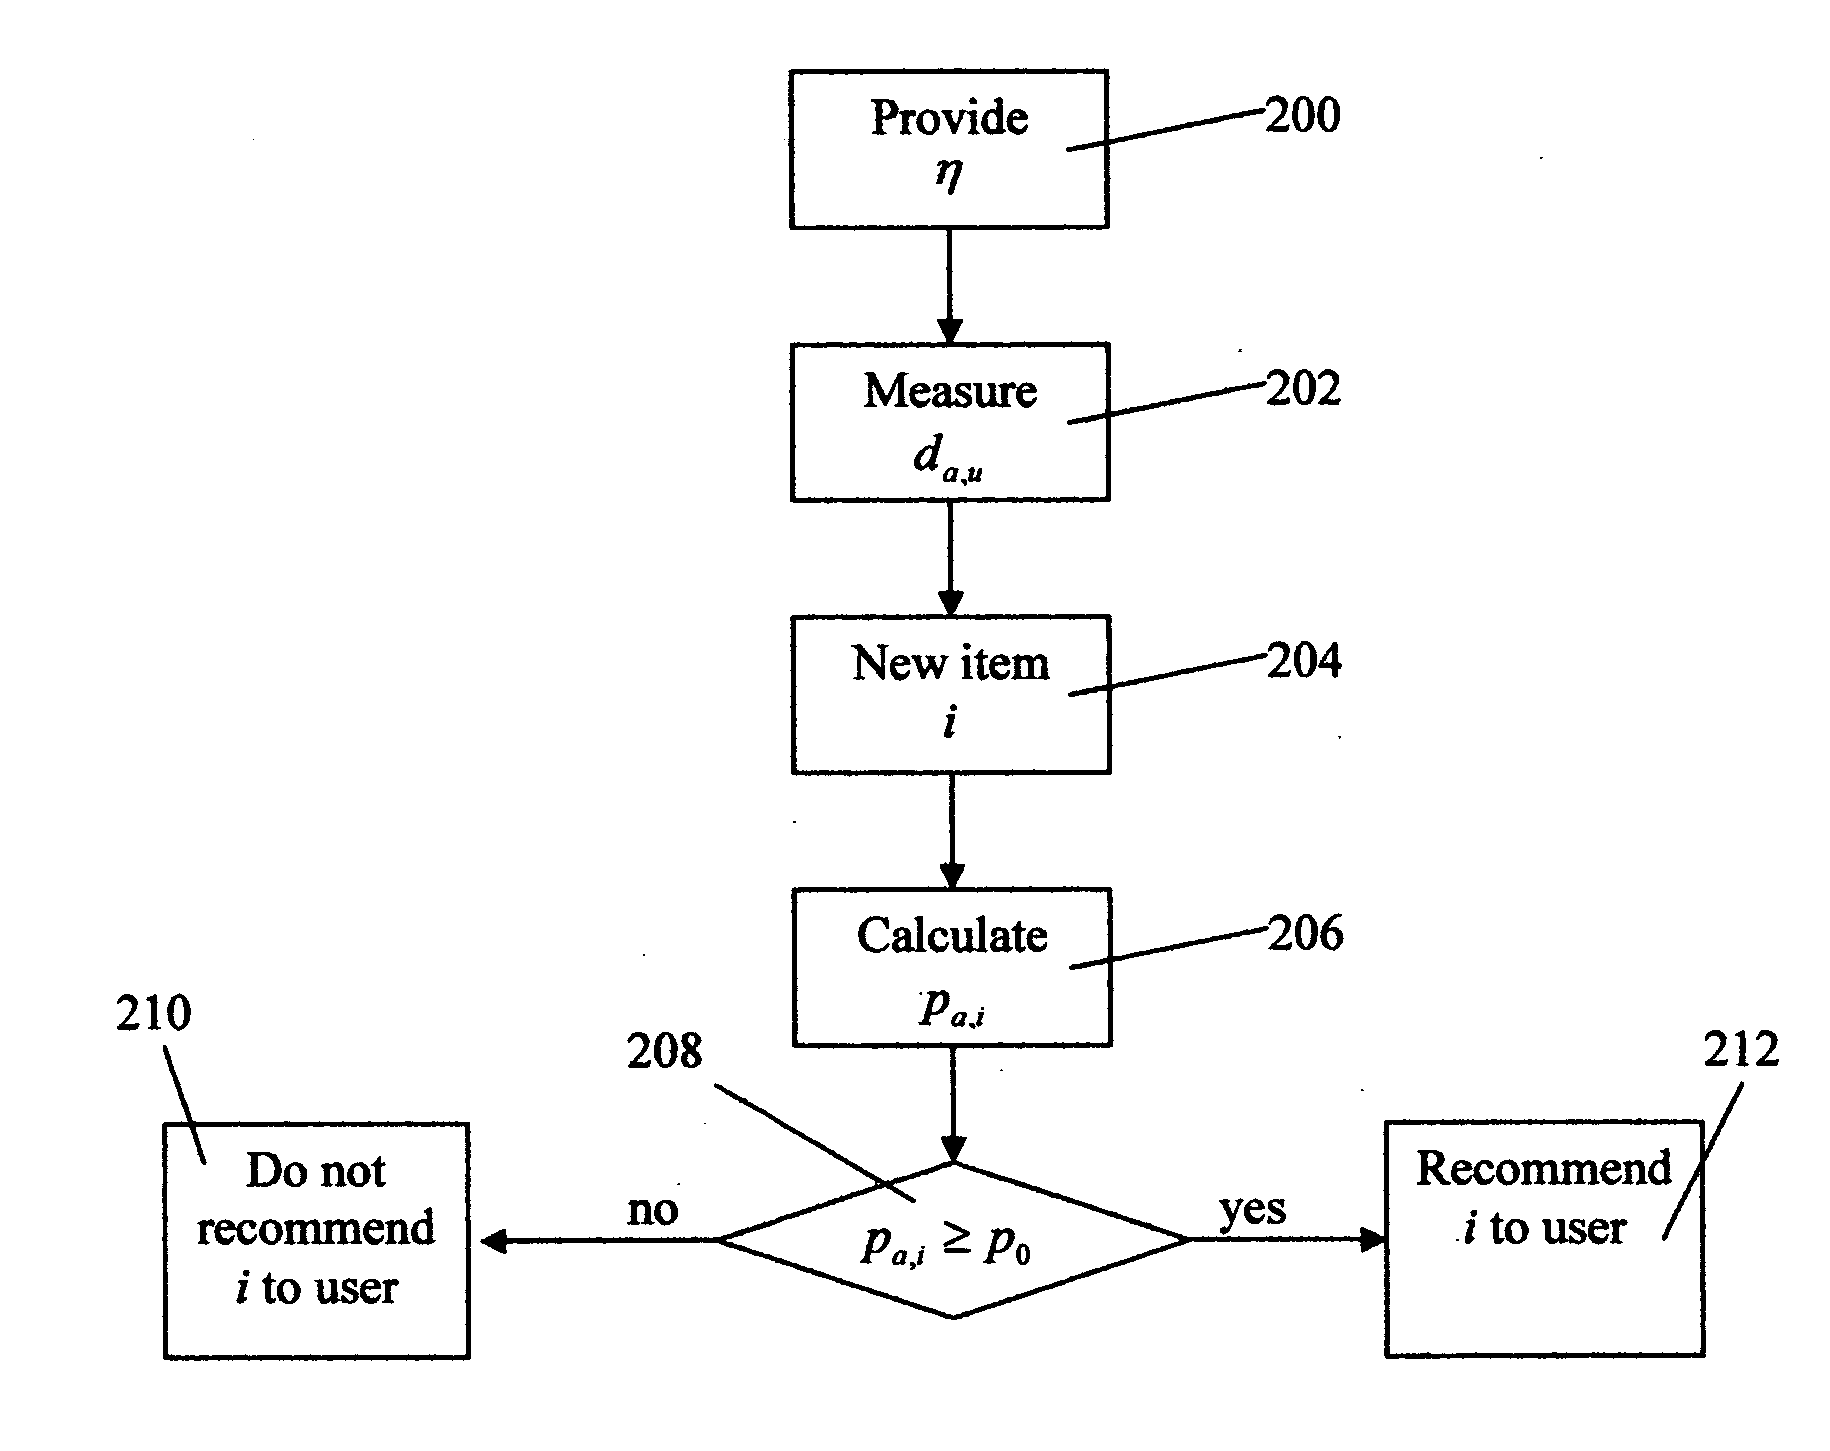 System and method for utilizing social networks for collaborative filtering